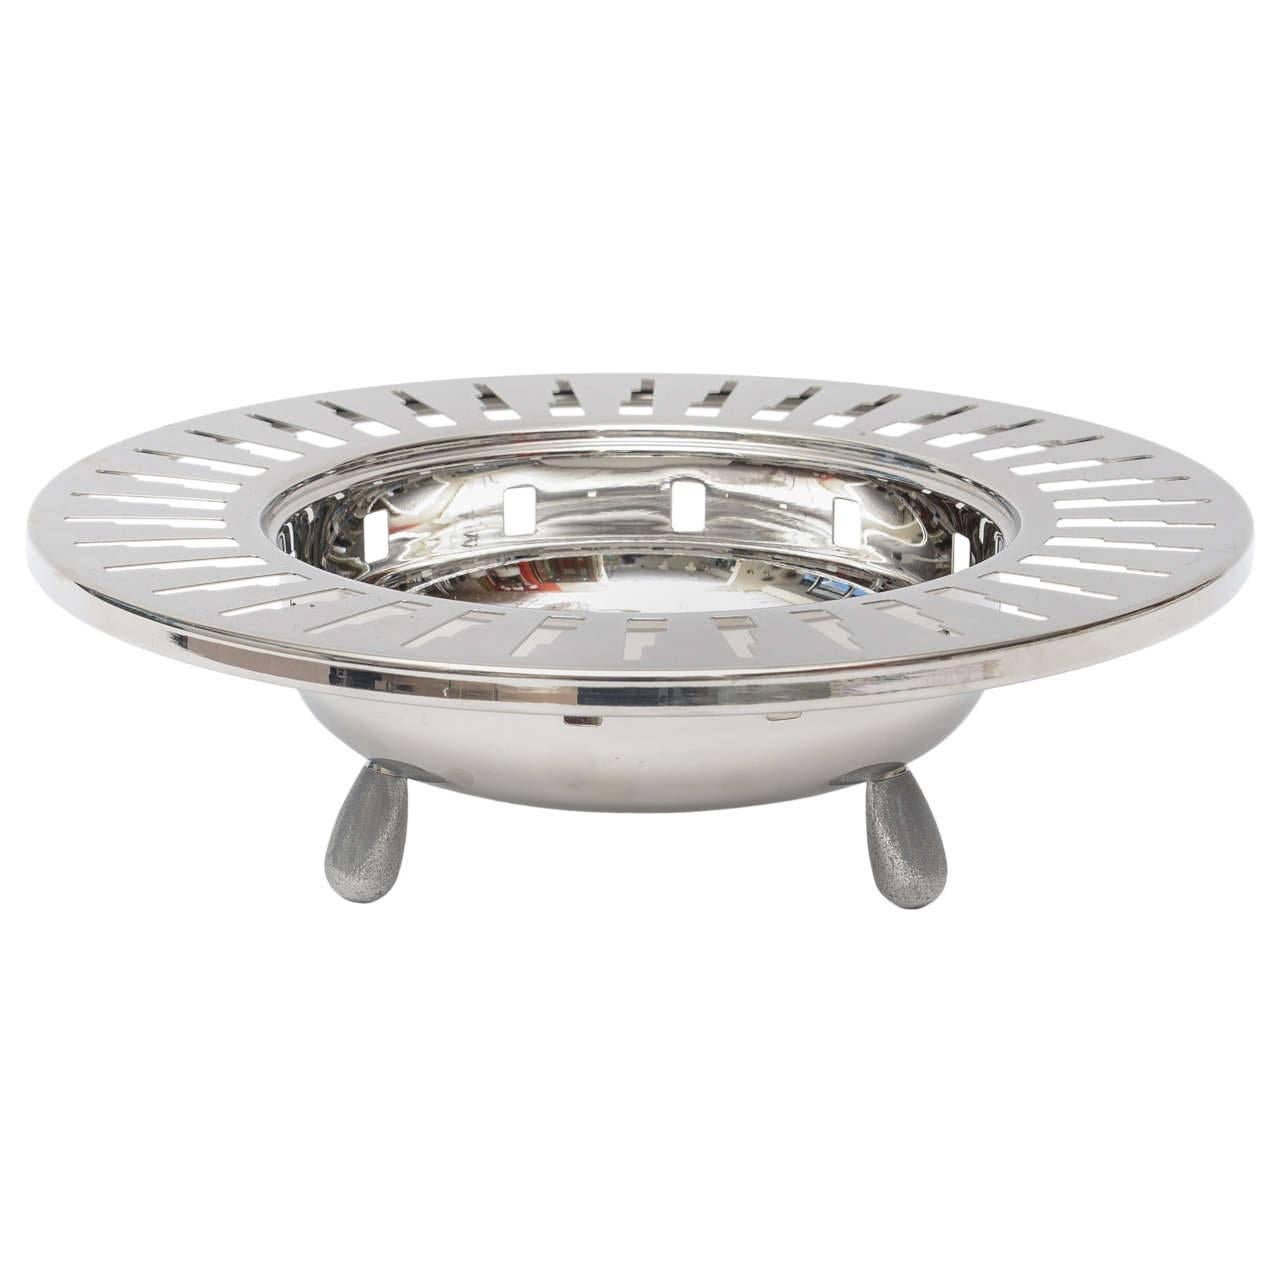 Italian Alessi Stainless Steel Cutout Skyscraper Footed Bowl For Sale